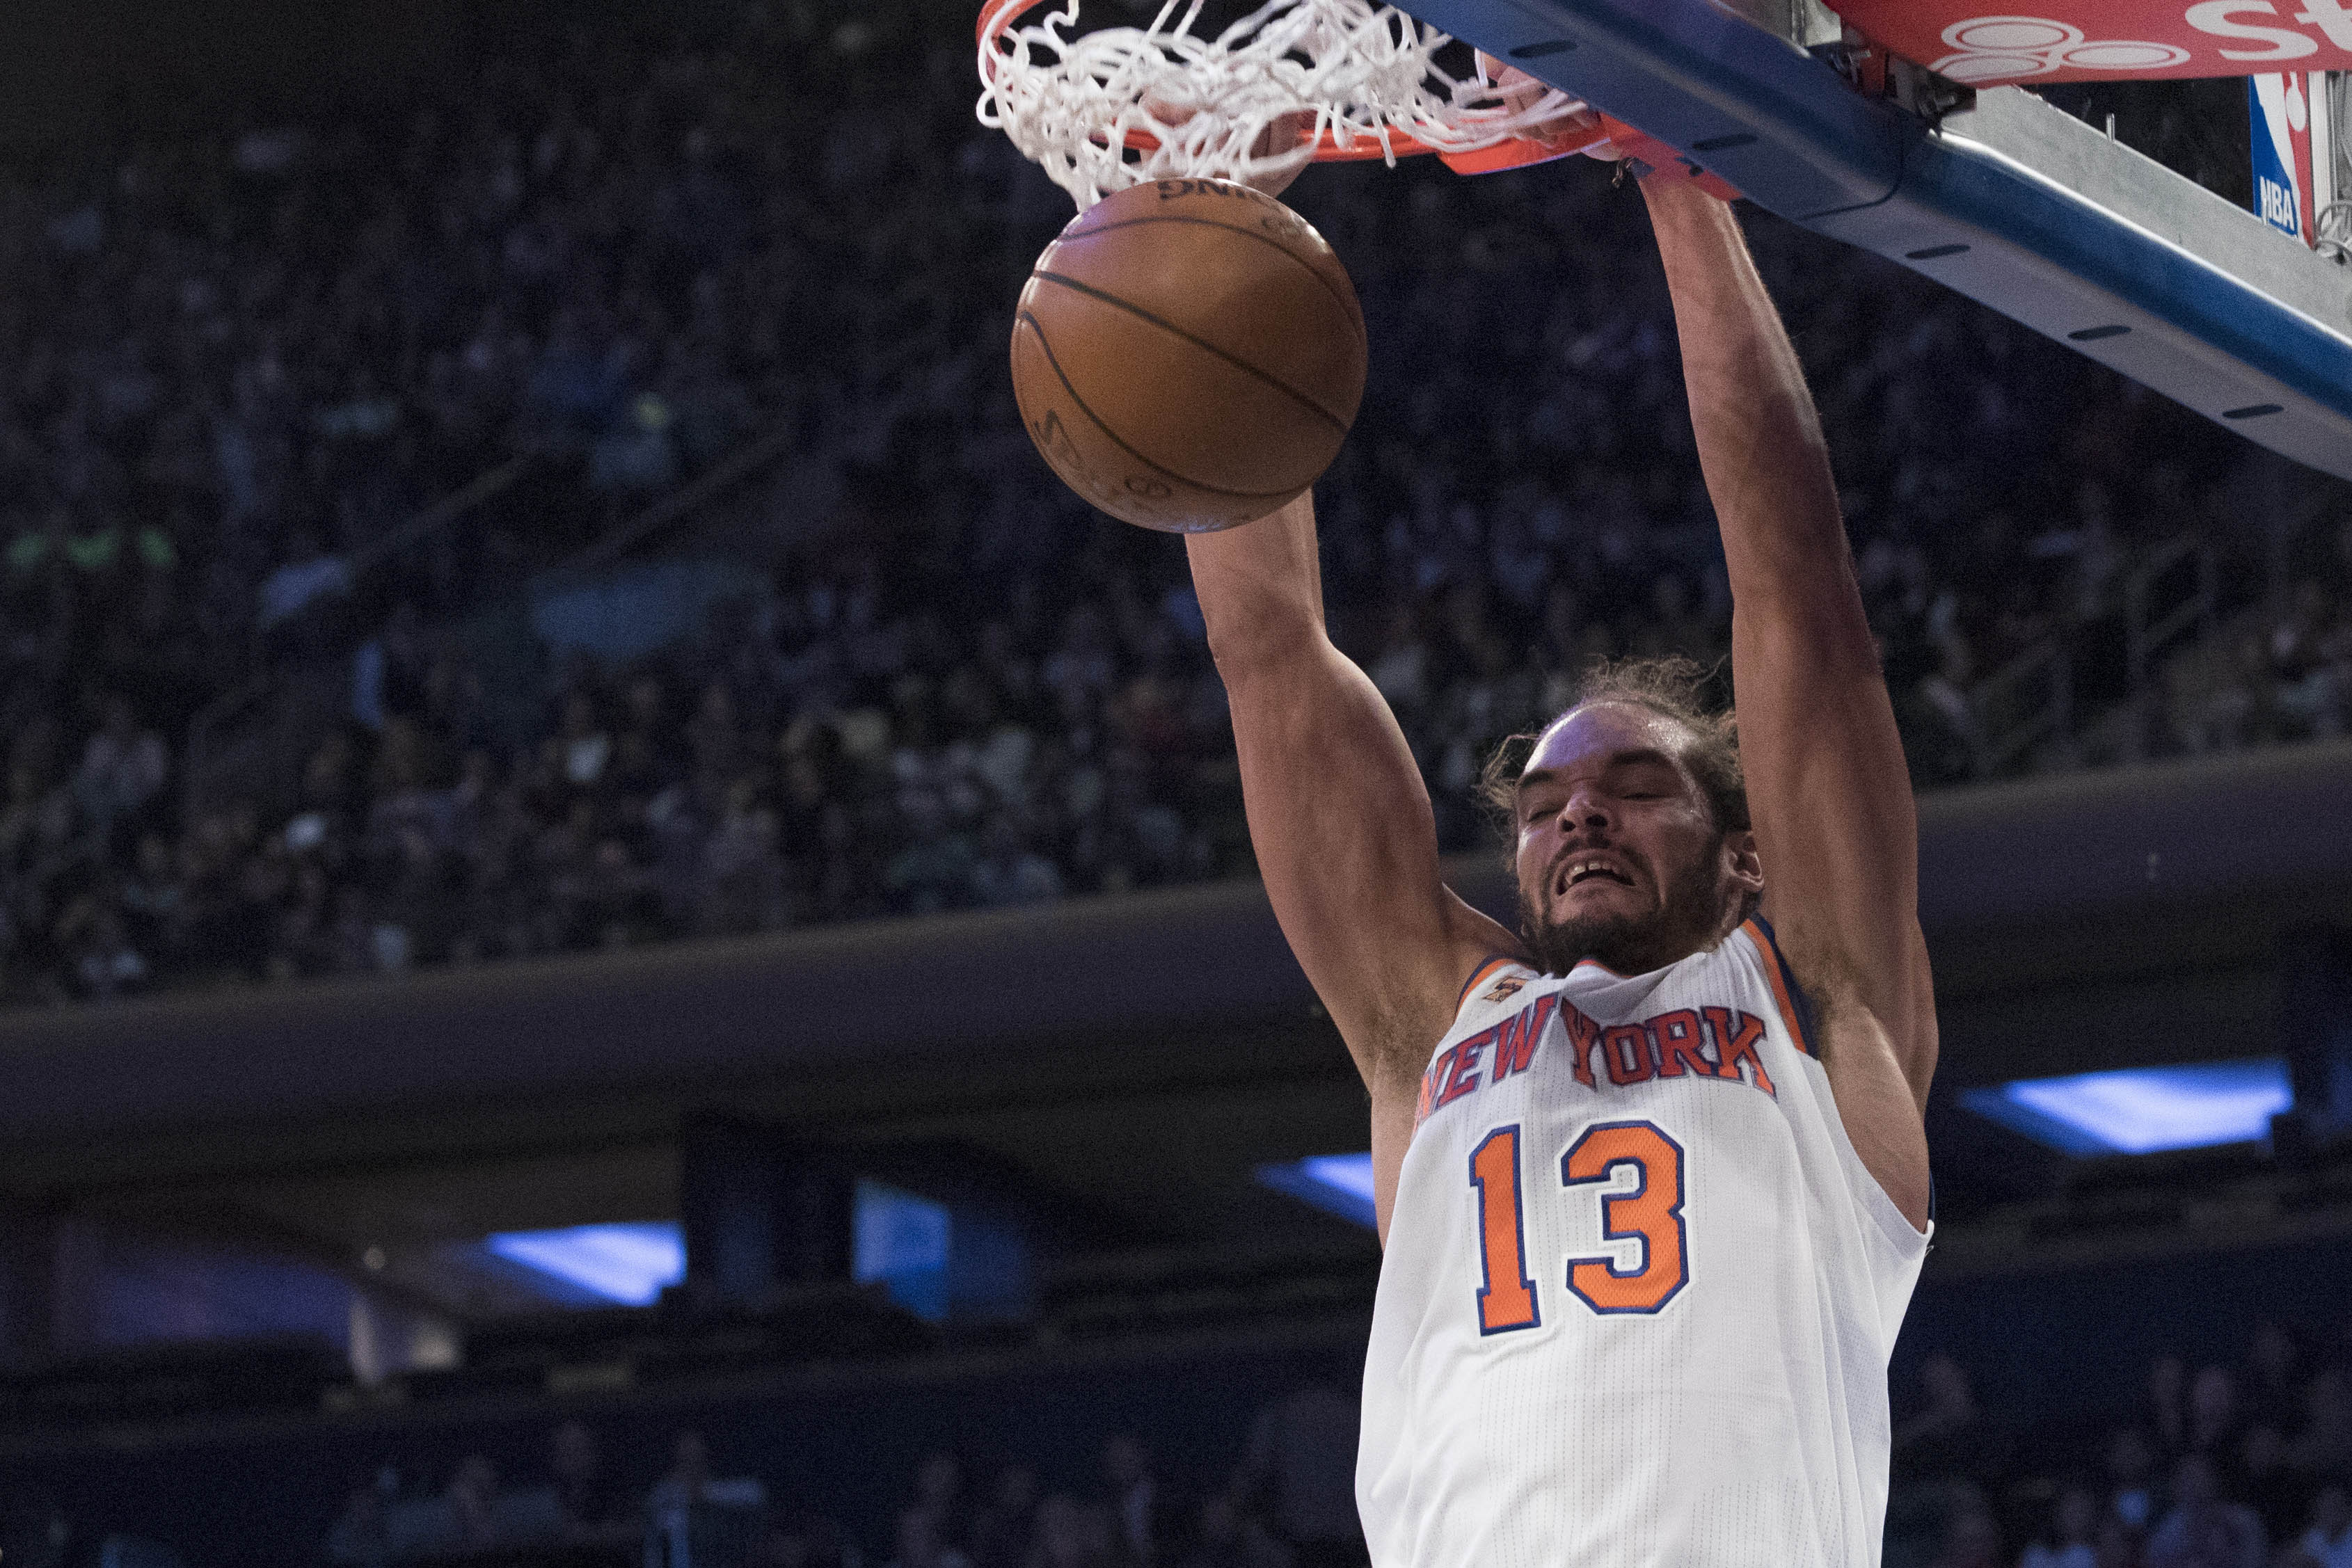 New York Knicks center Joakim Noah dunks during the first half of a preseason NBA basketball game against the Boston Celtics, Saturday, Oct. 15, 2016, at Madison Square Garden in New York. (AP Photo/Mary Altaffer)